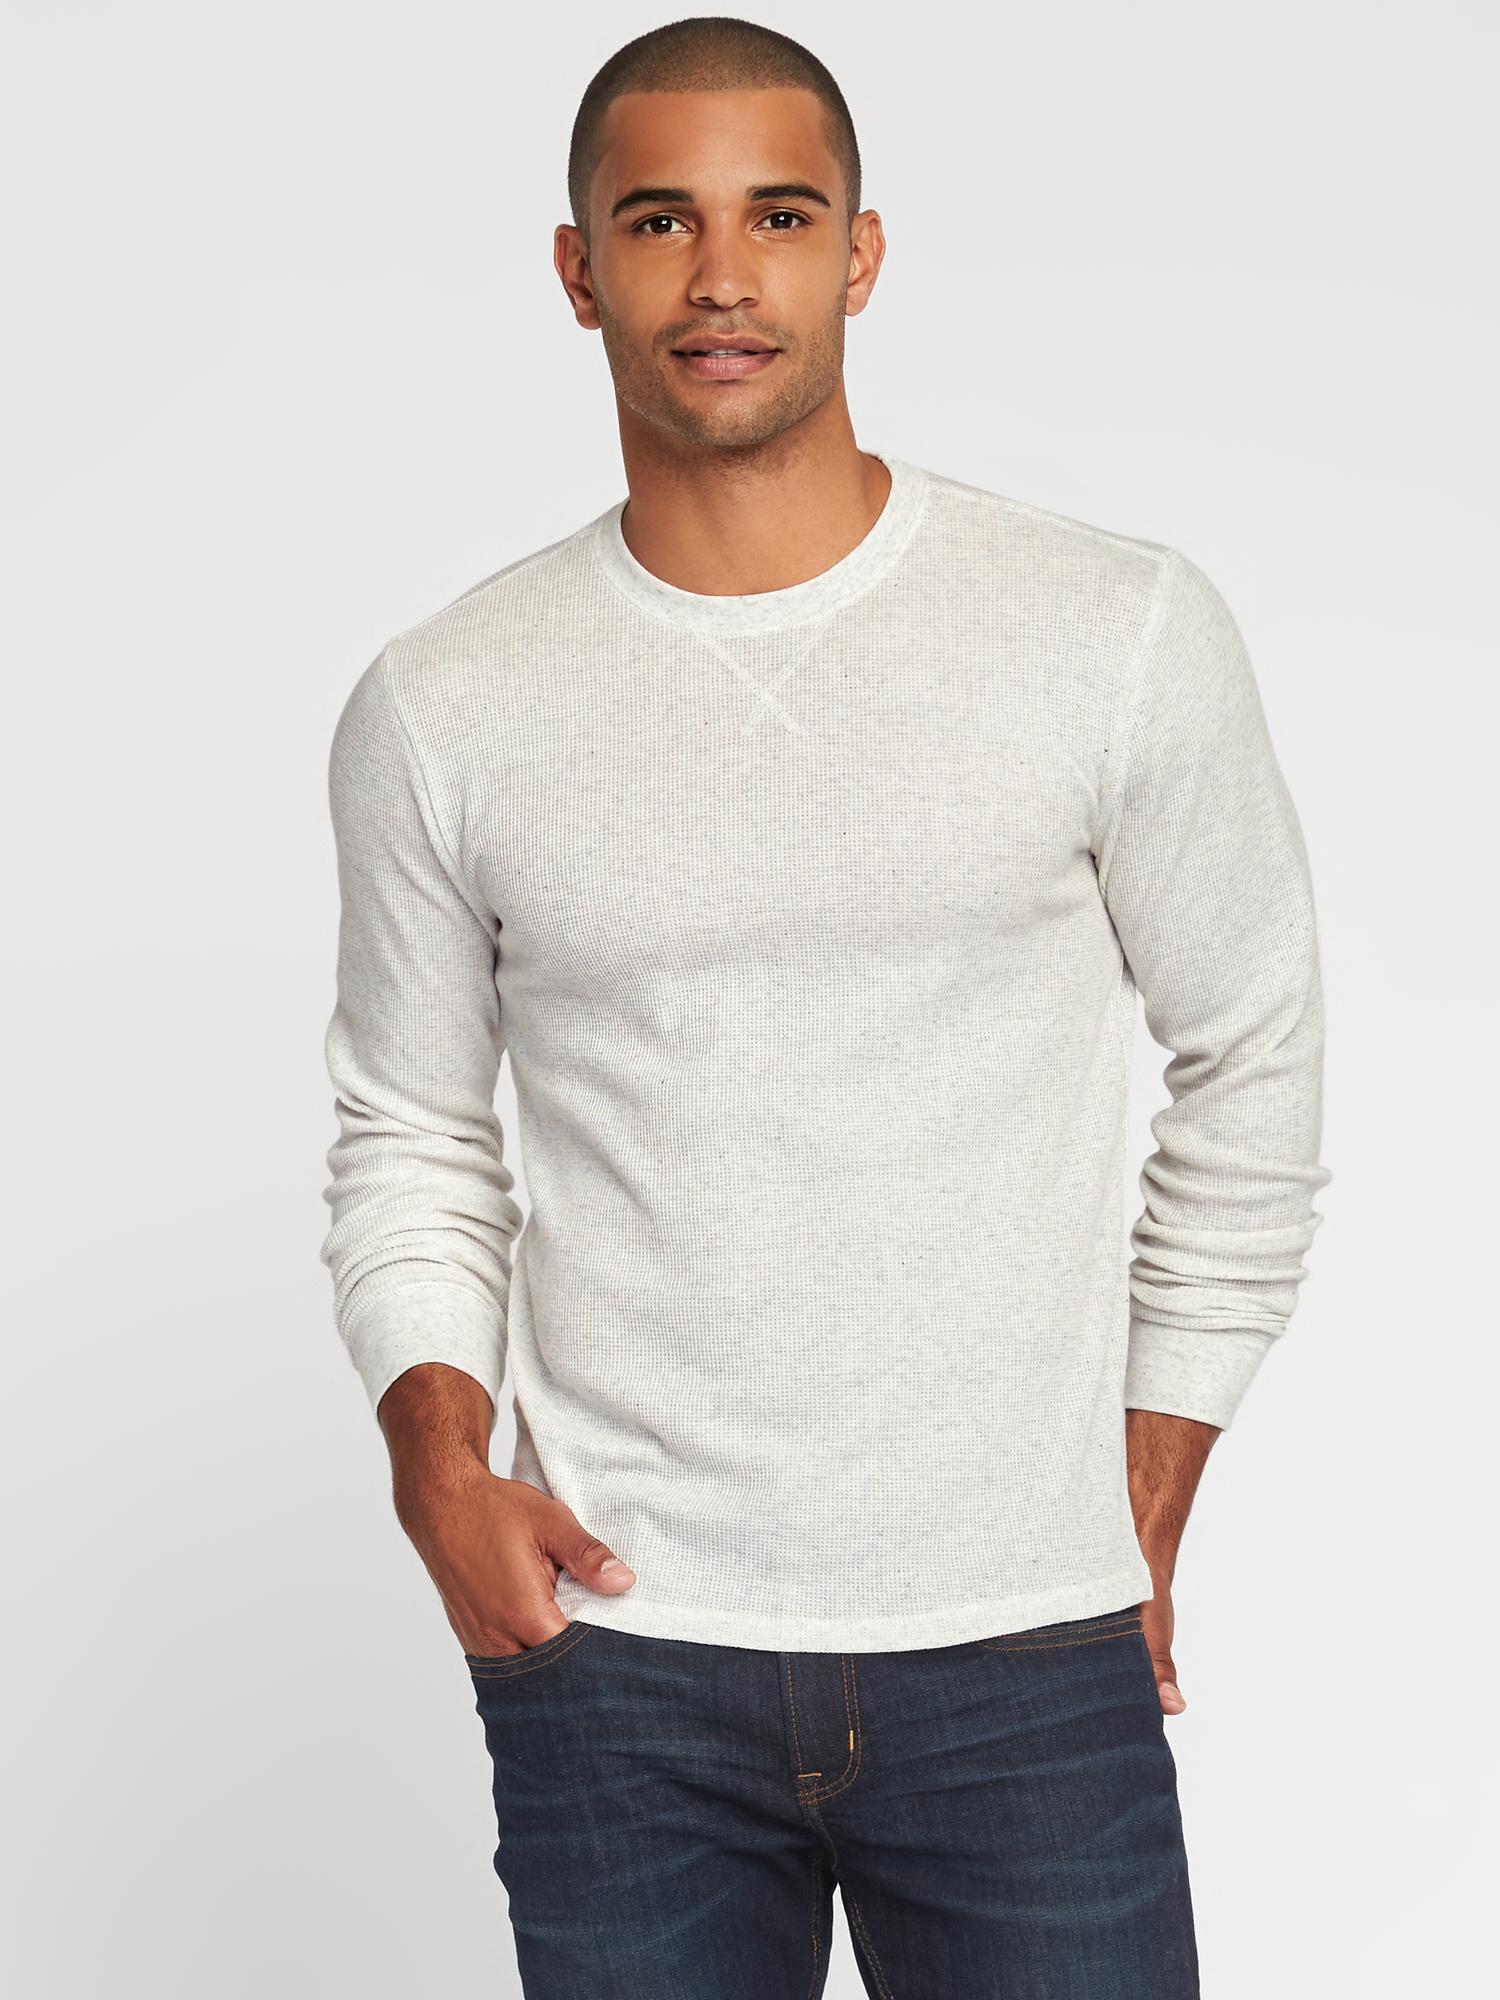 Soft-Washed Built-In Flex Thermal Tee for Men | Old Navy